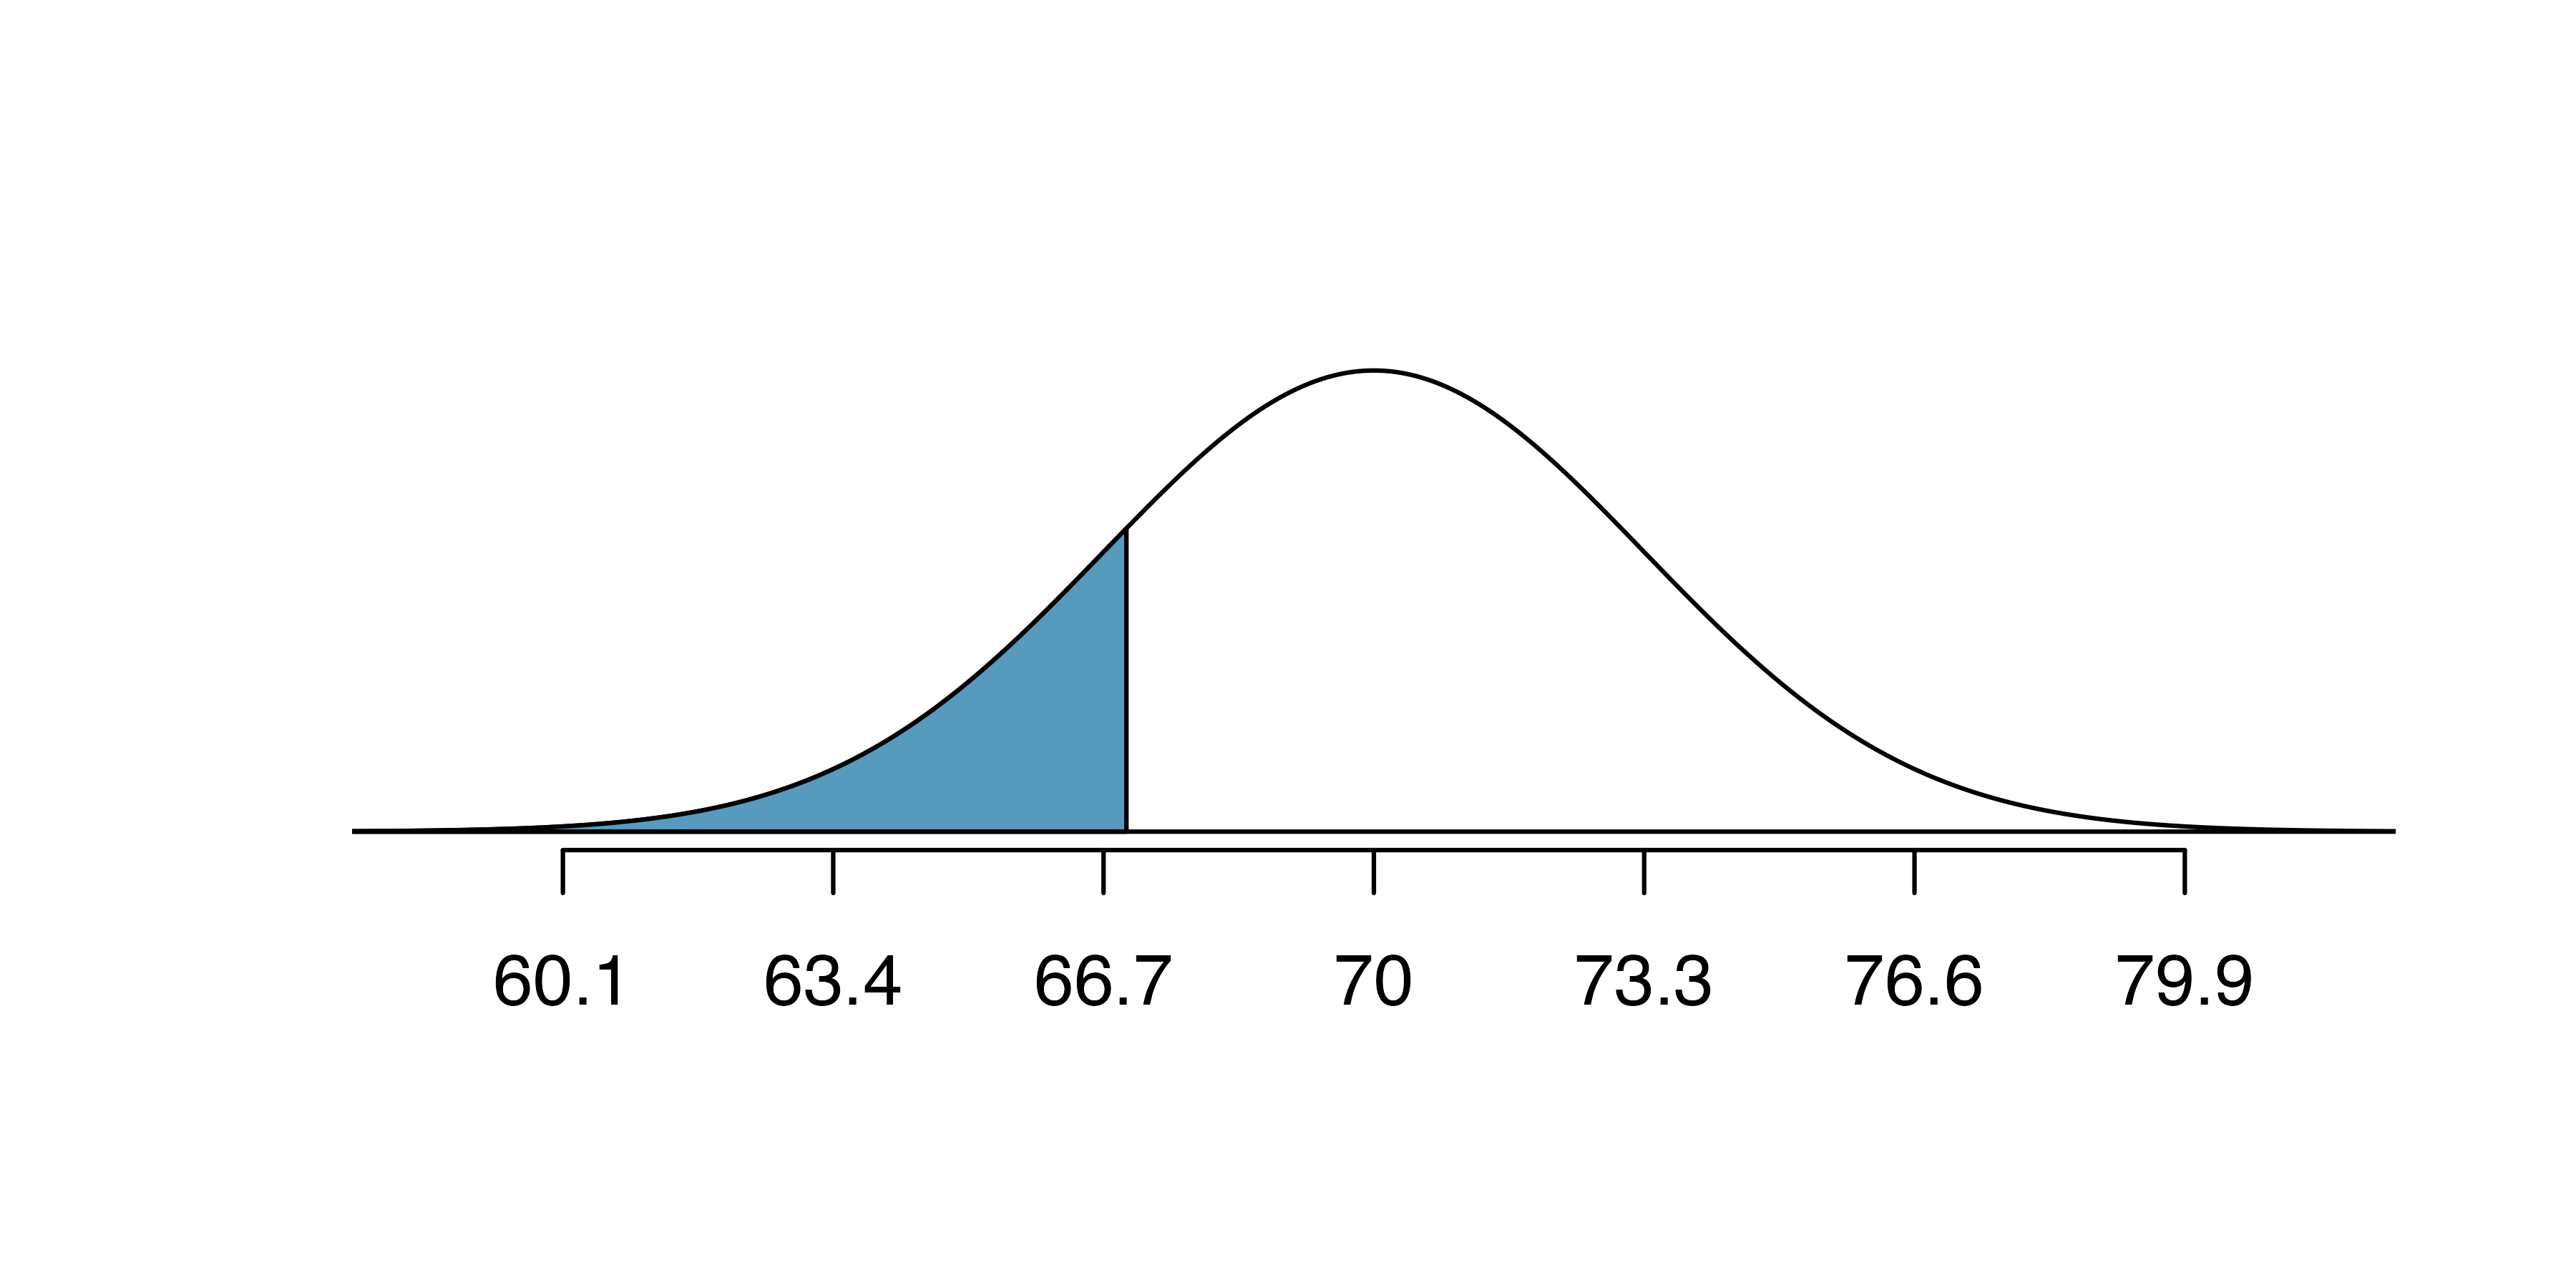 Two normal curves representing the distribution of heights. The first curve shows Kamron's height, shading below 67 inches, and the second curve shows Adrian's height, shading below 70 inches. 